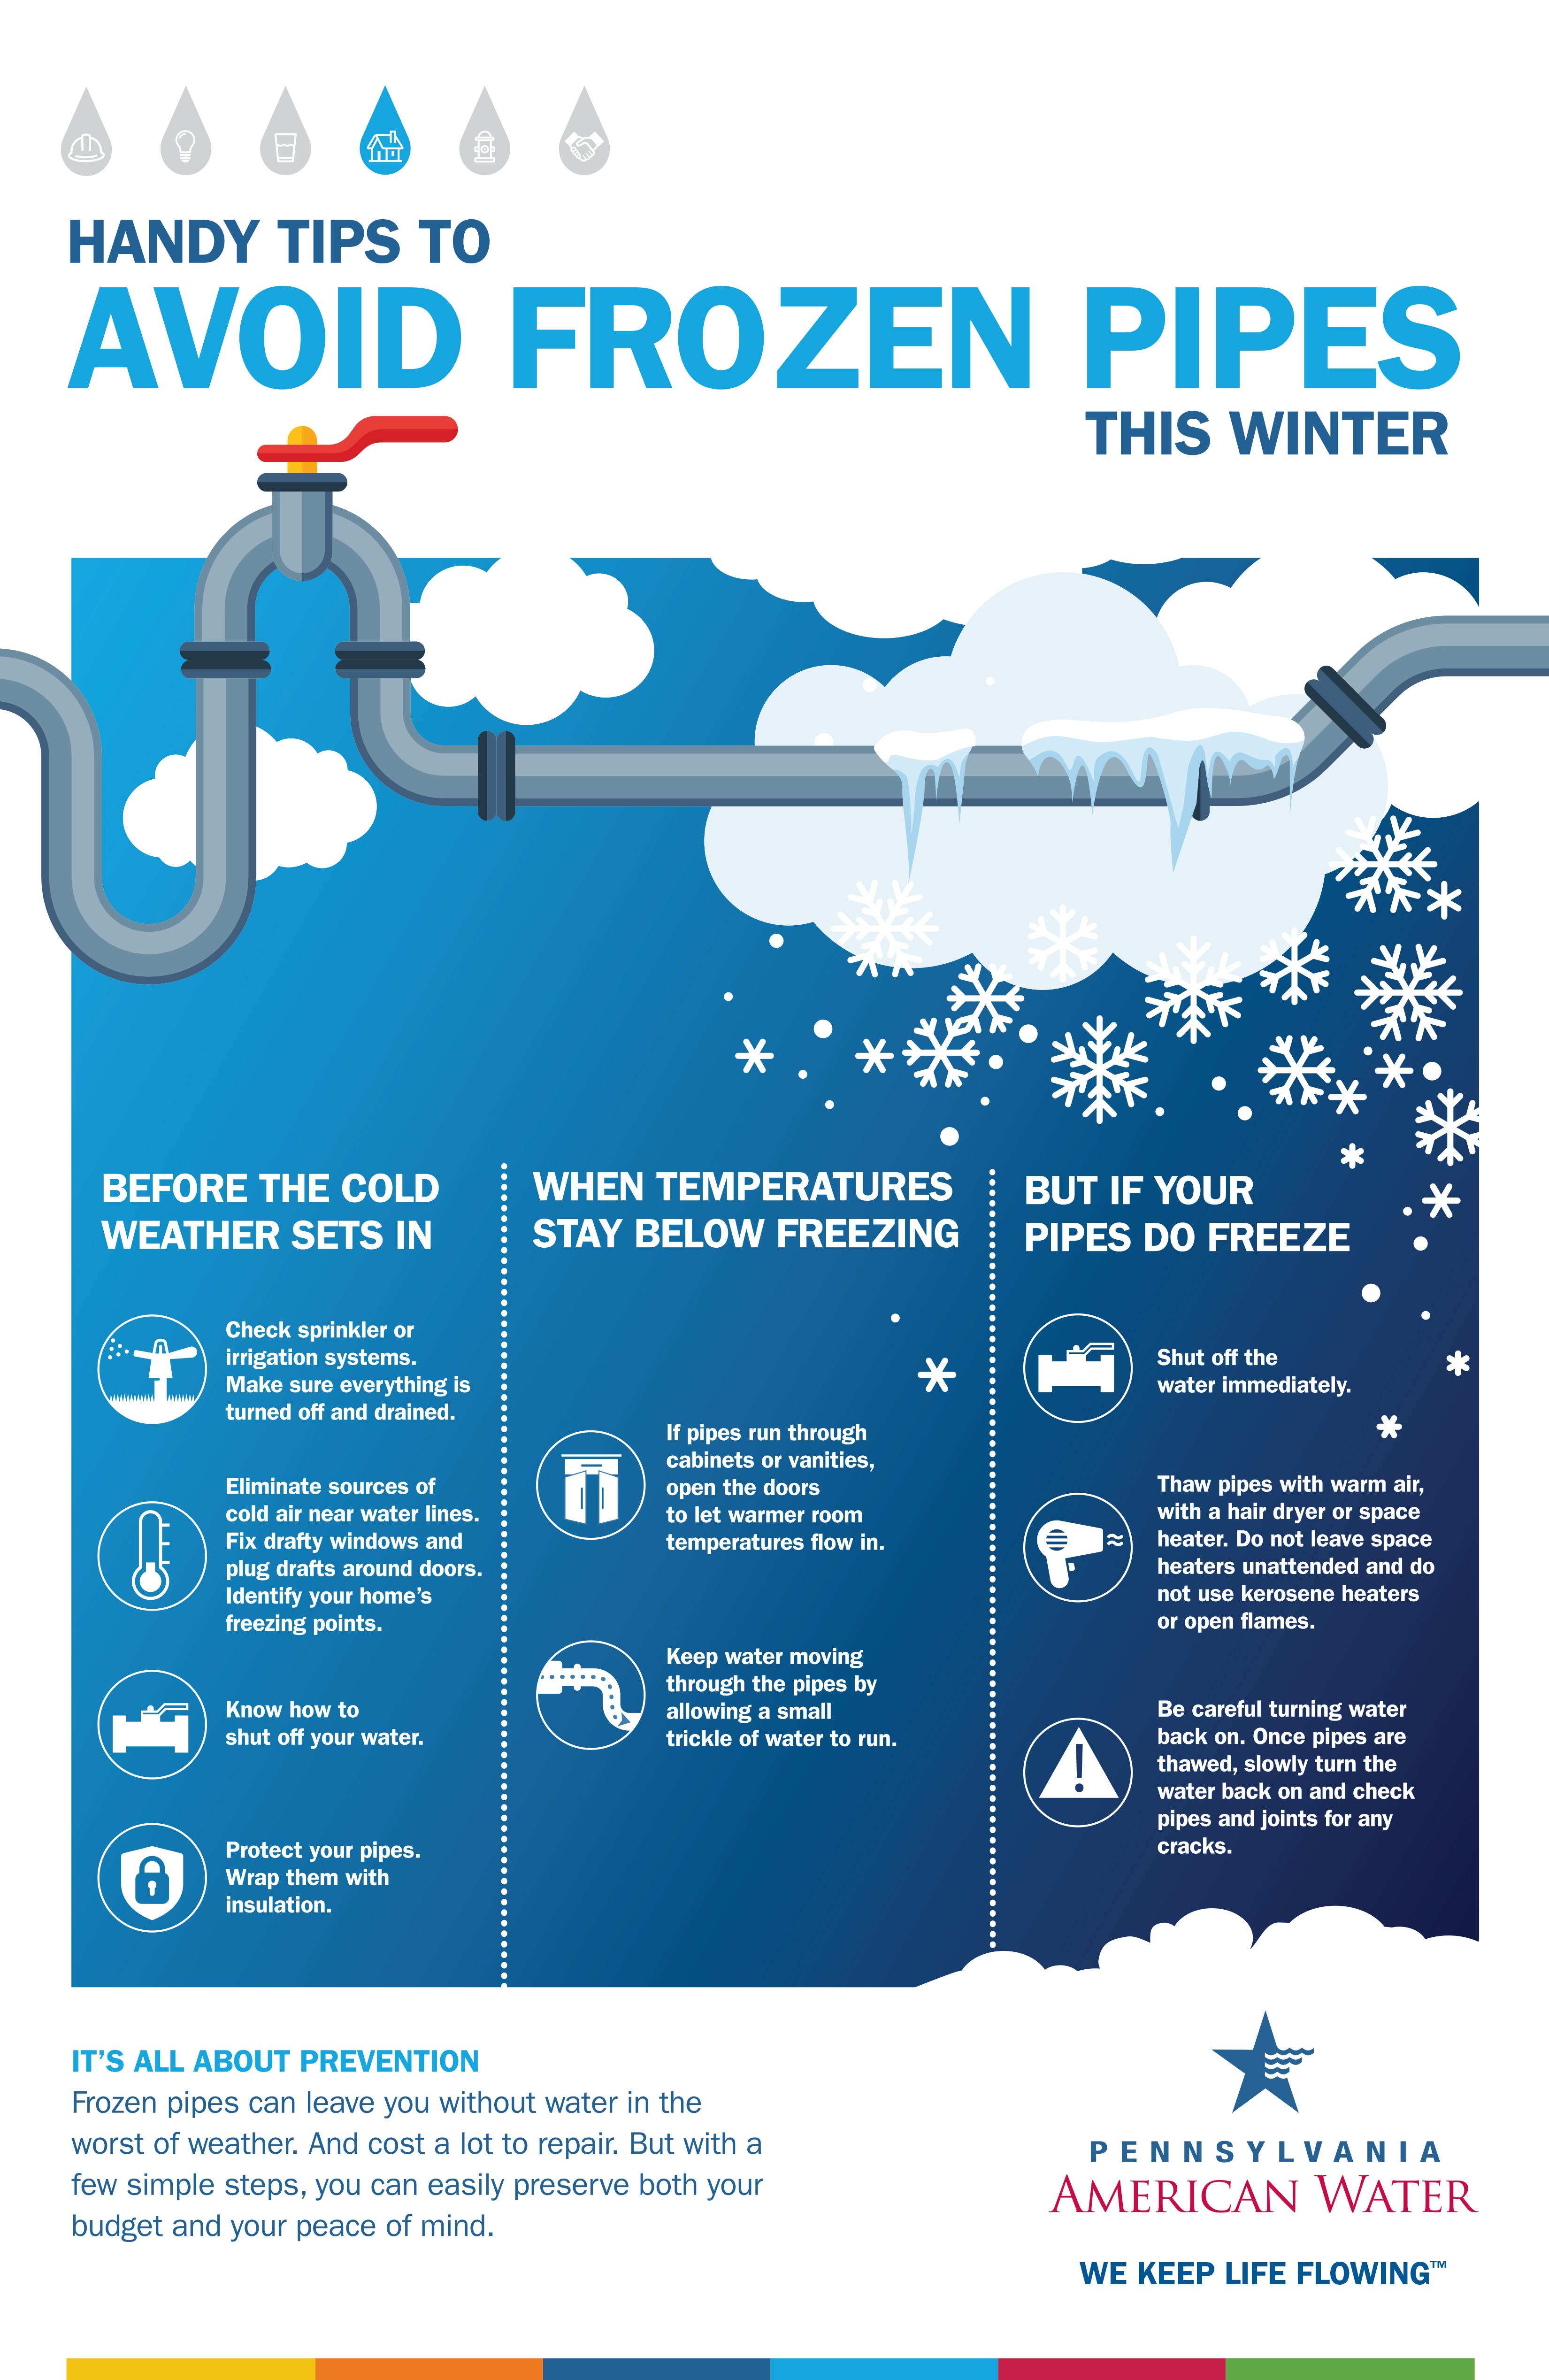 Pennsylvania American Water Reminds Customers That Arctic Temperatures Can Freeze Home Plumbing | Business Wire